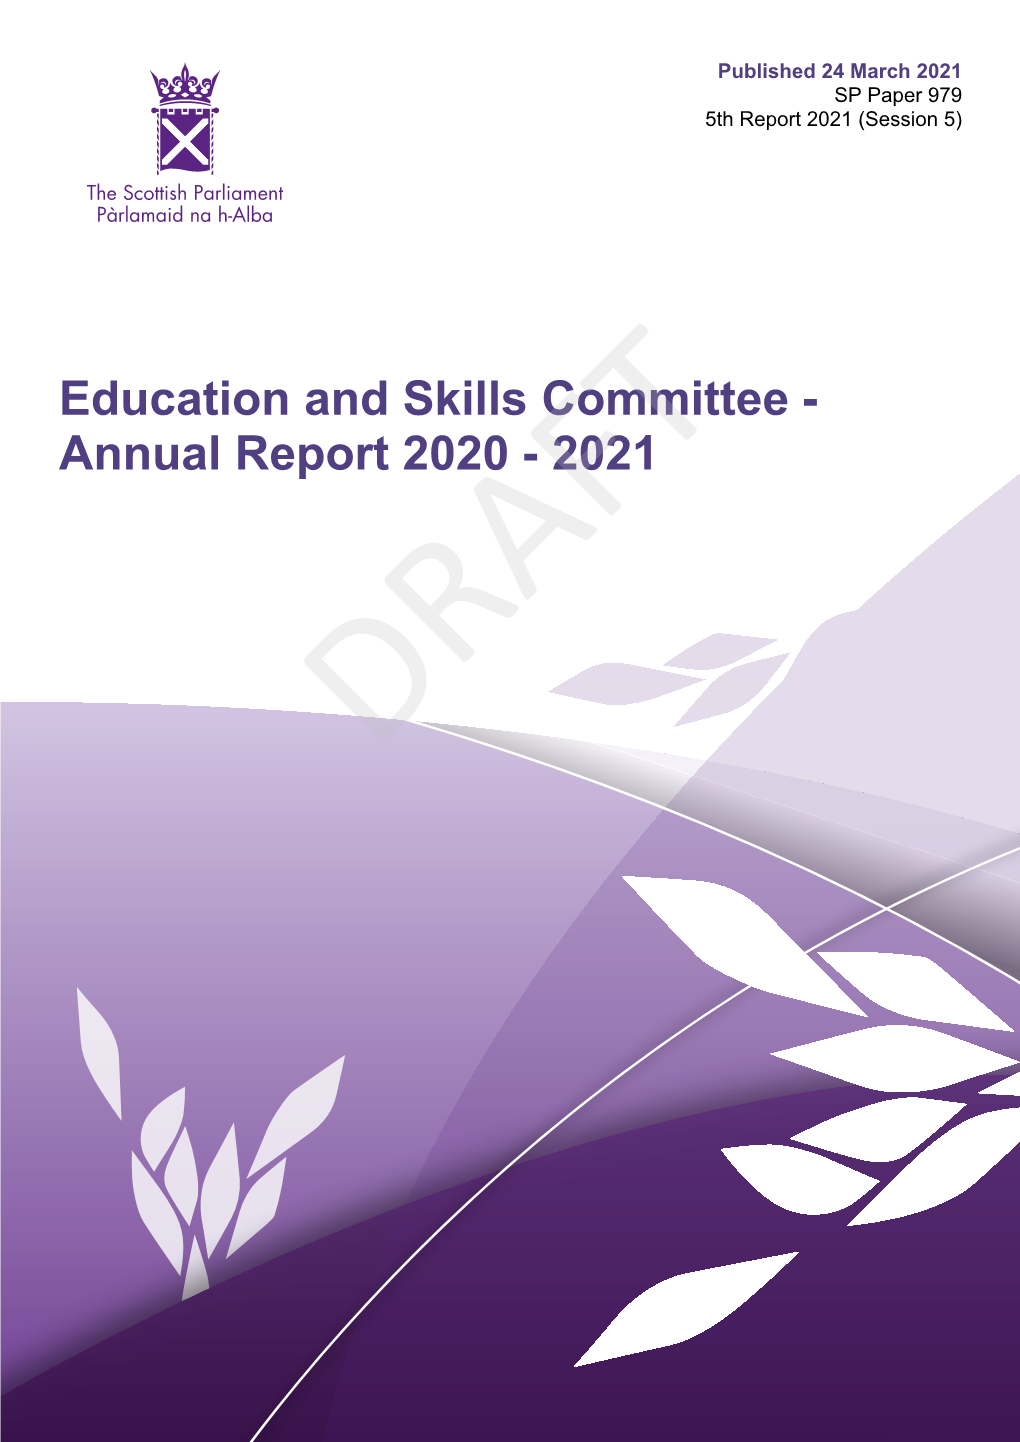 Education and Skills Committee - Annual Report 2020 - 2021